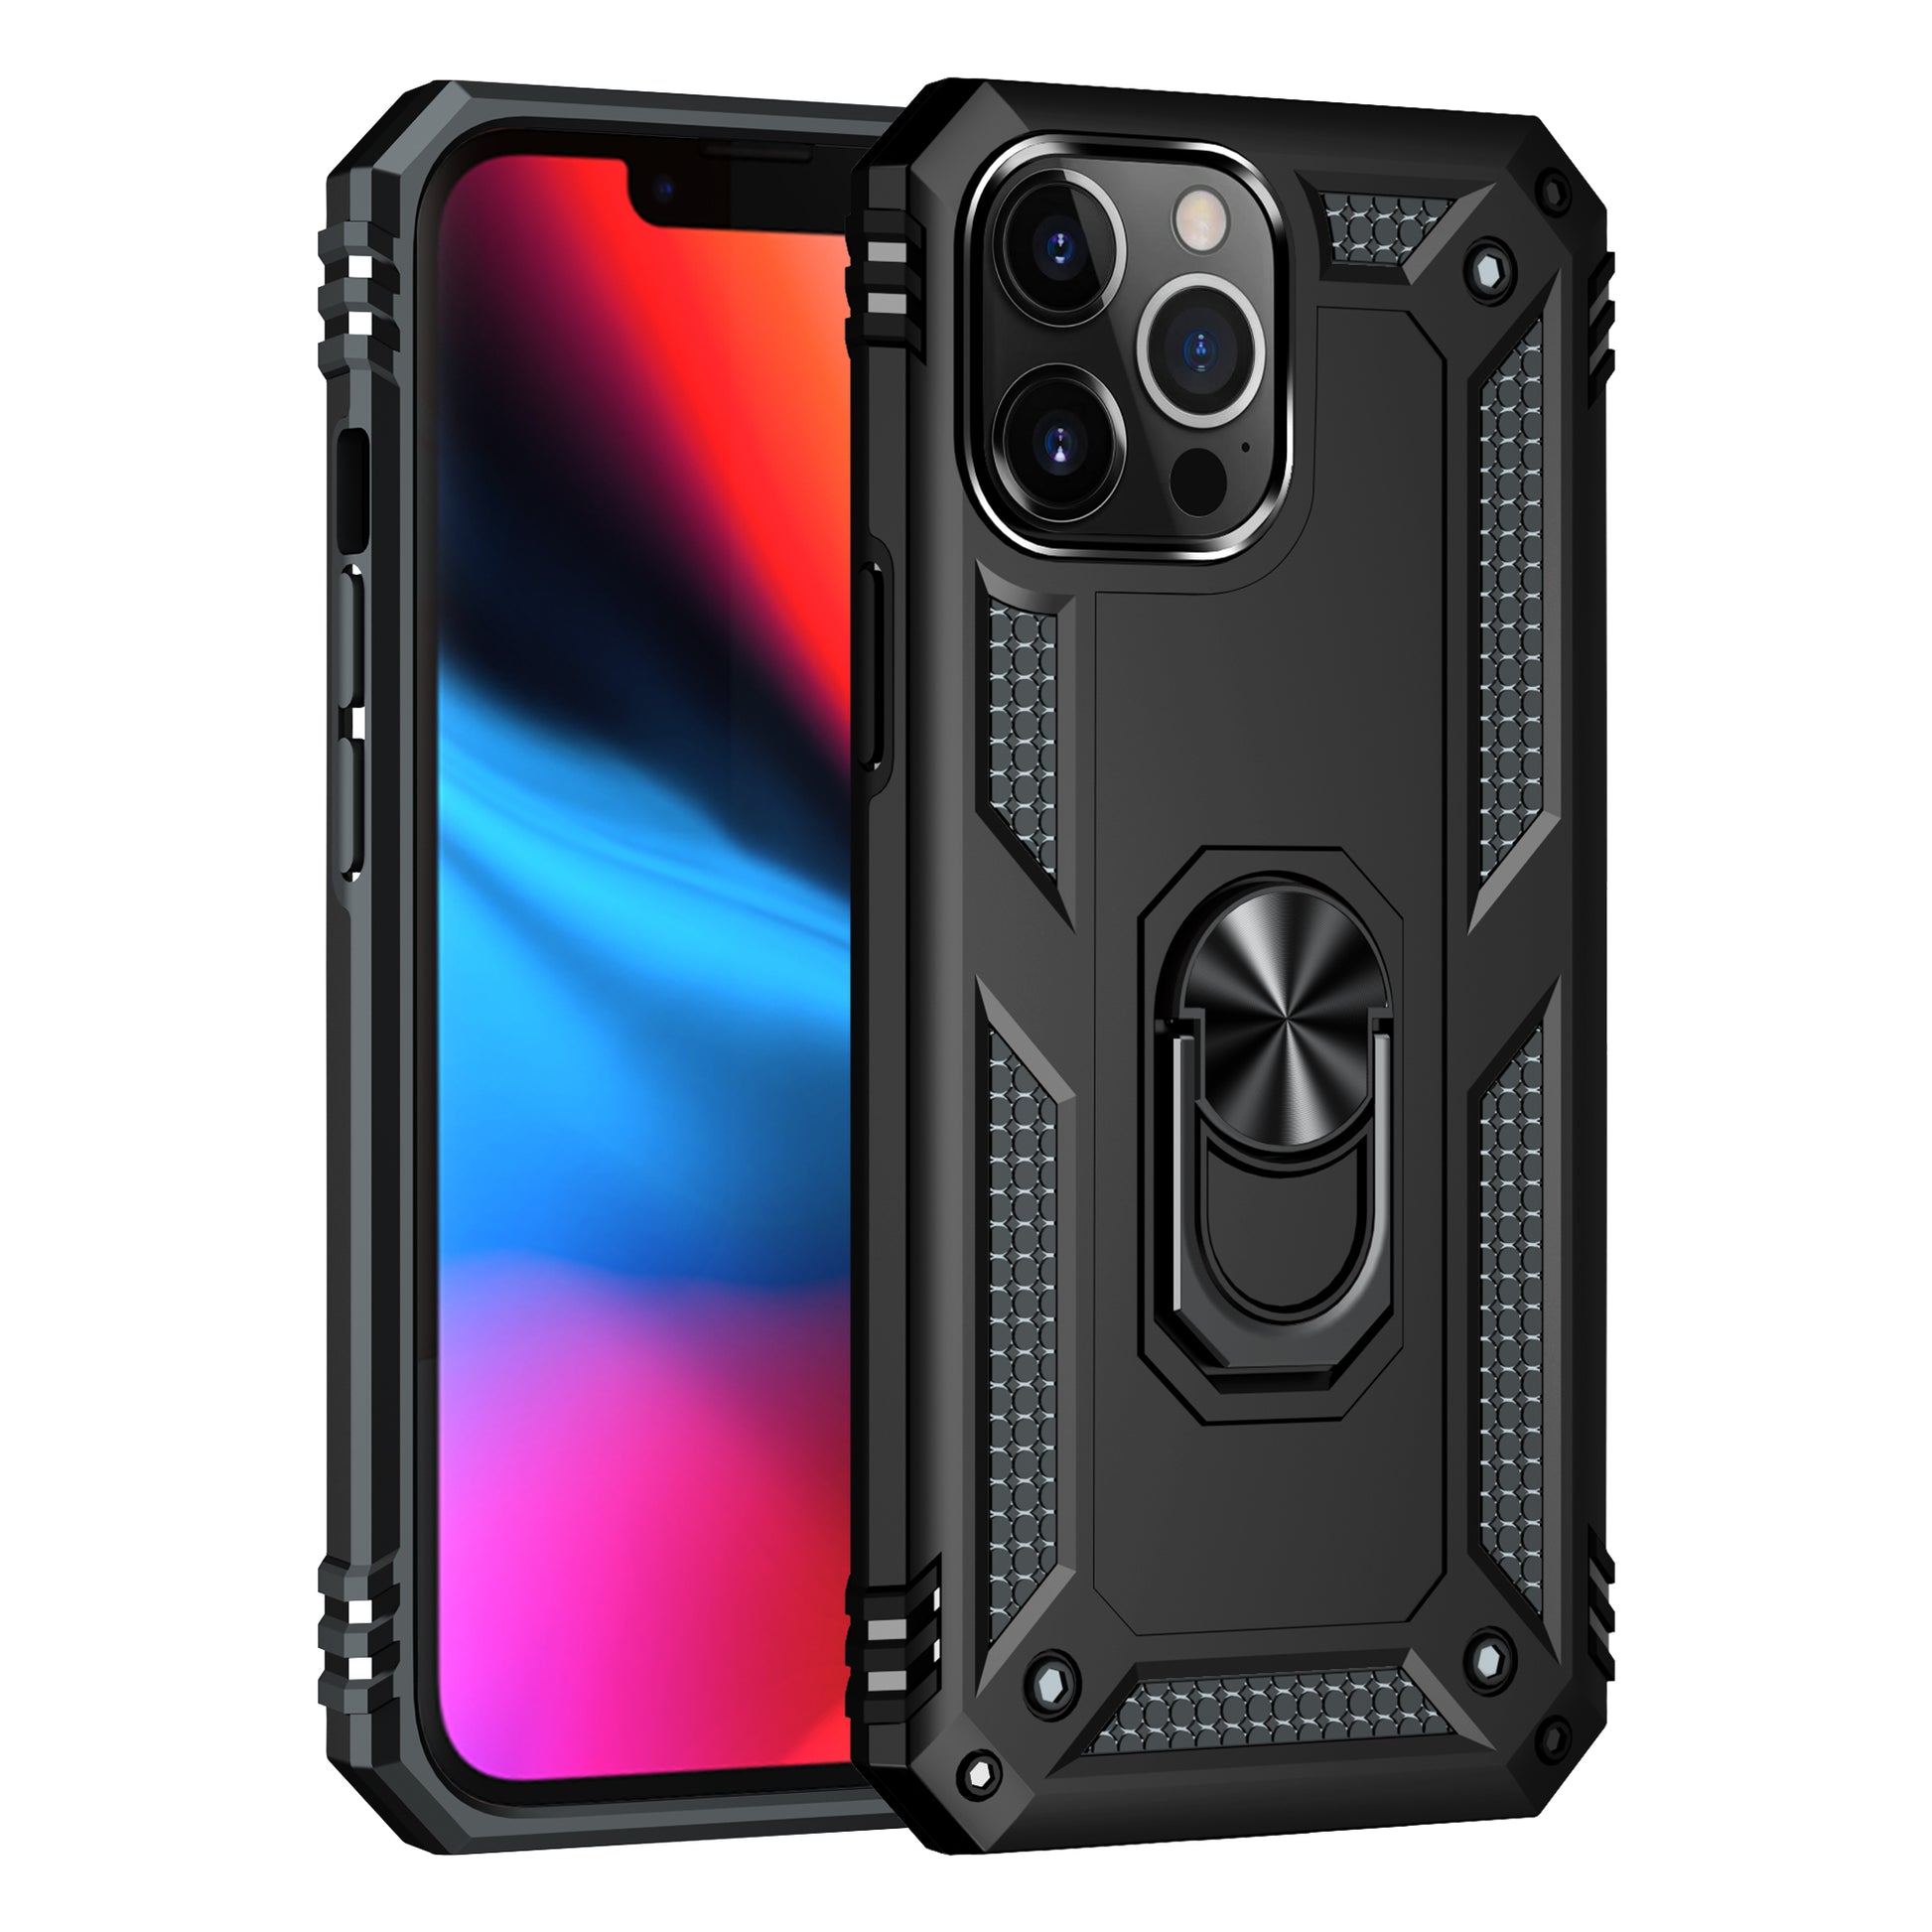 Ring Armor Phone Case for iPhone

